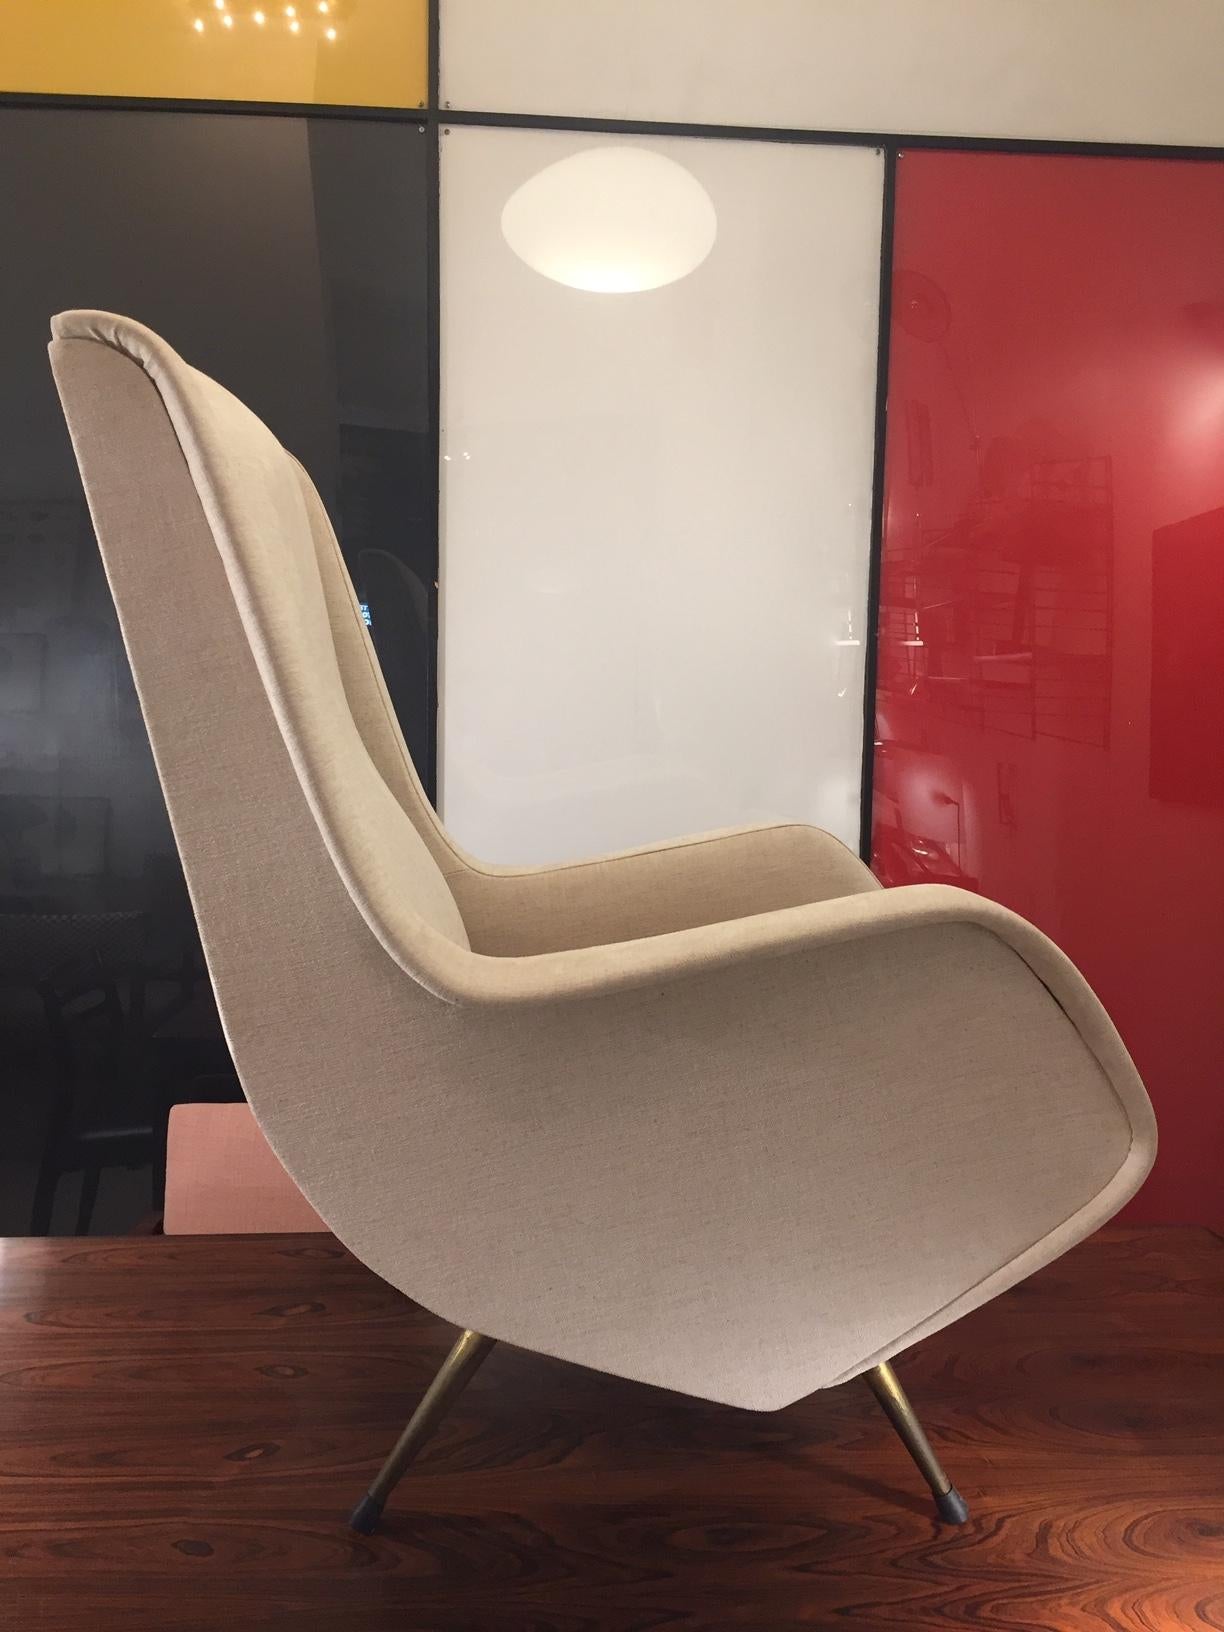 A midcentury Italian pair of armchairs designed by Aldo Morbelli in the 1950s. Reupholstered in Kvadrat light beige fabric. Brass feet. Smart and elegant. Impeccable.